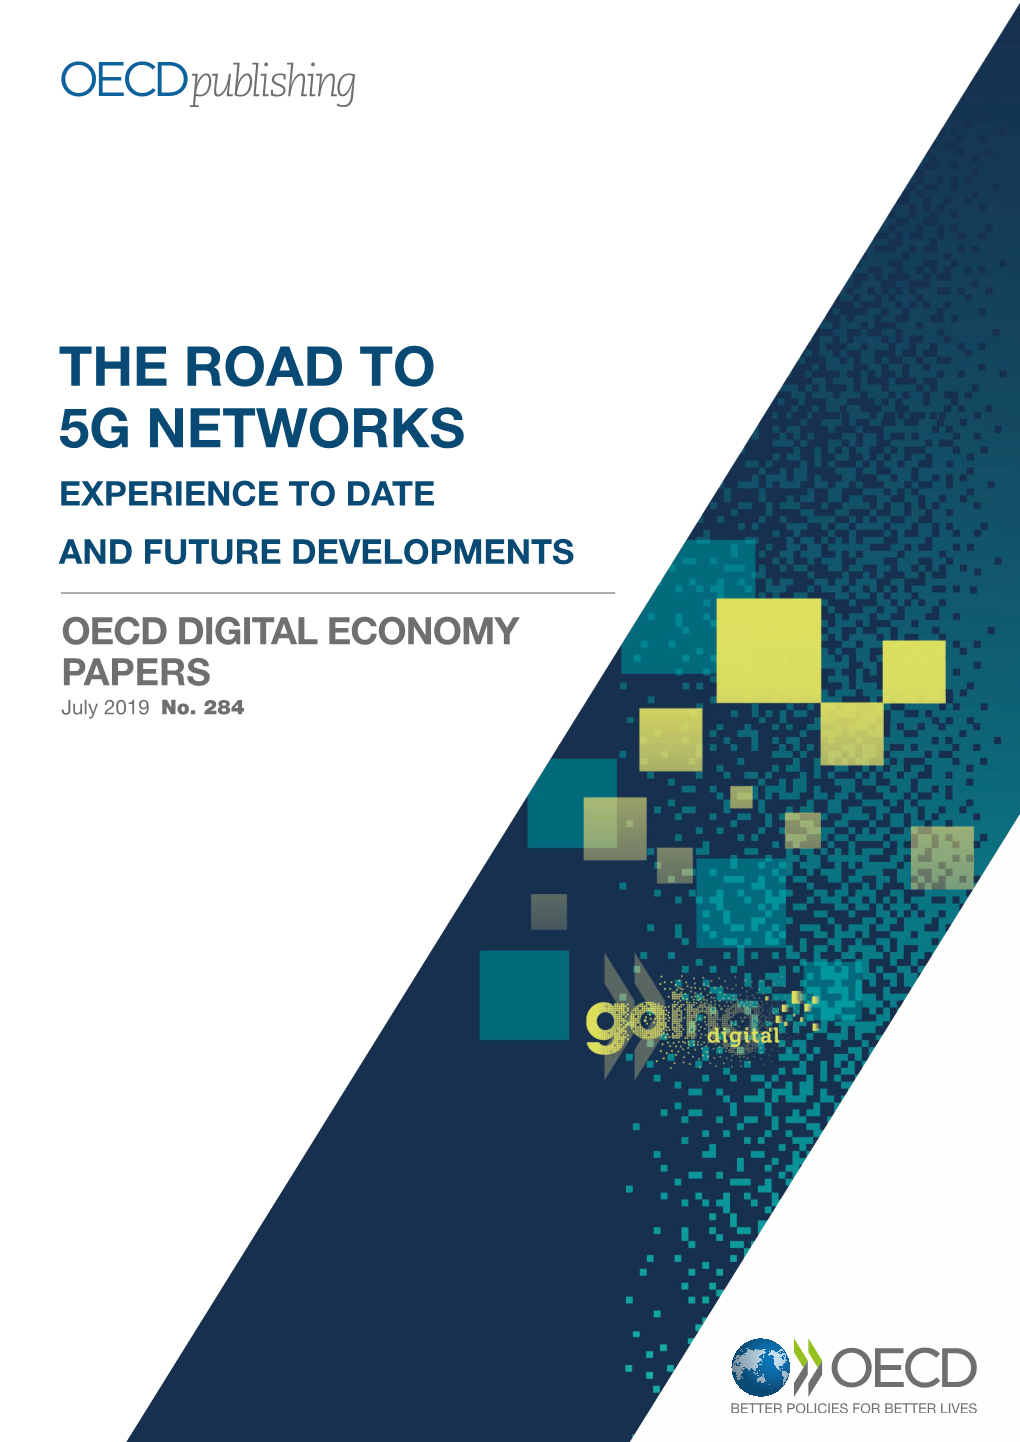 The Road to 5G Networks Experience to Date and Future Developments